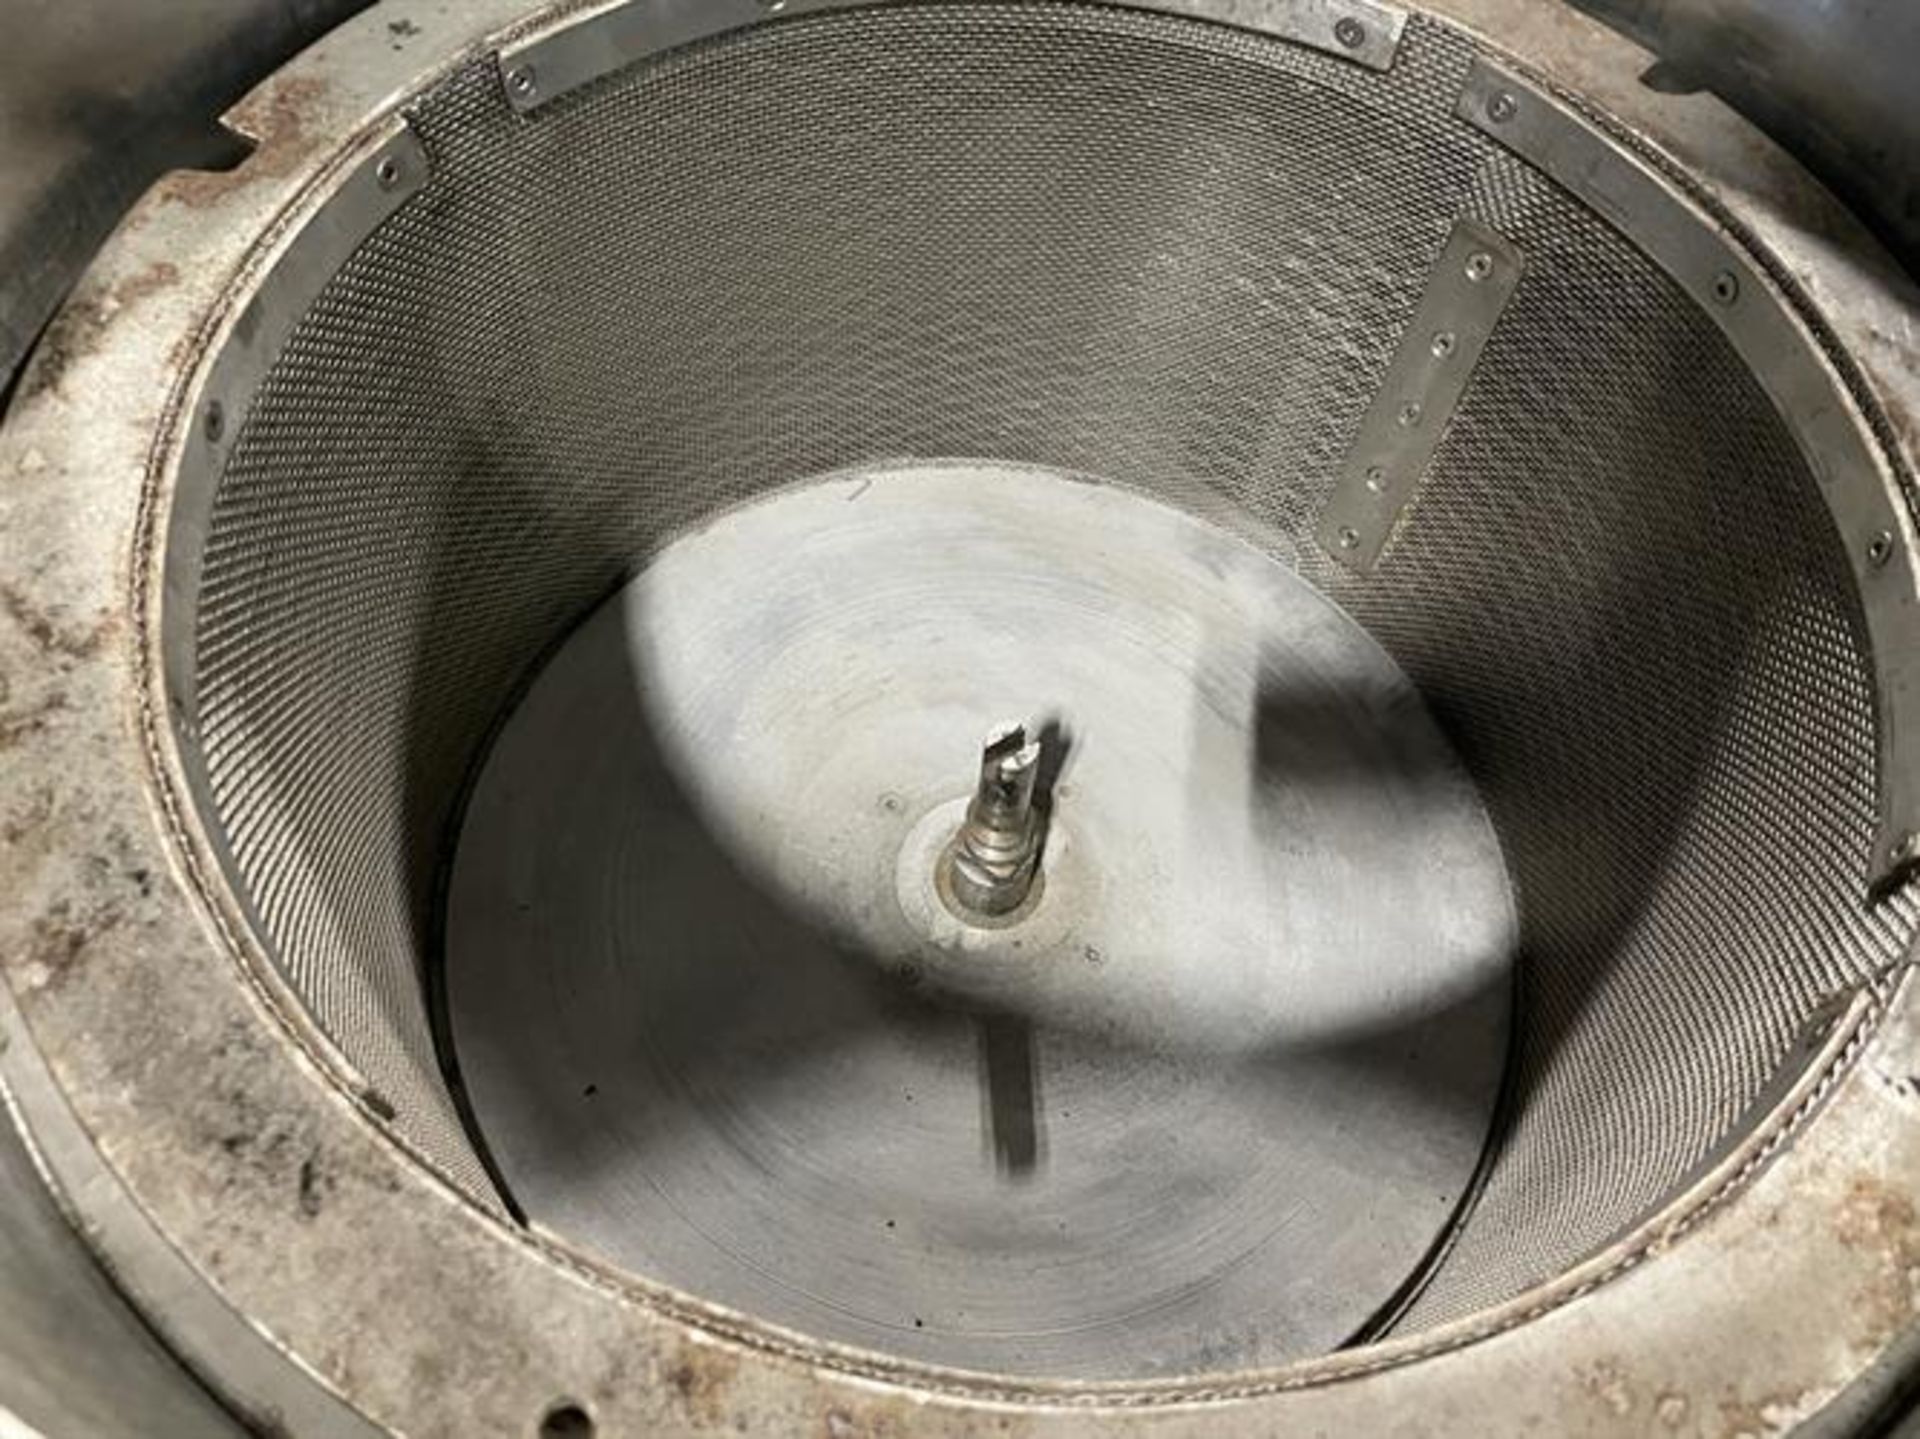 Whirlwind Engineering Warthog stainless Steel Mill for High Fat & Sticky Products - 18" diameter - Image 3 of 6